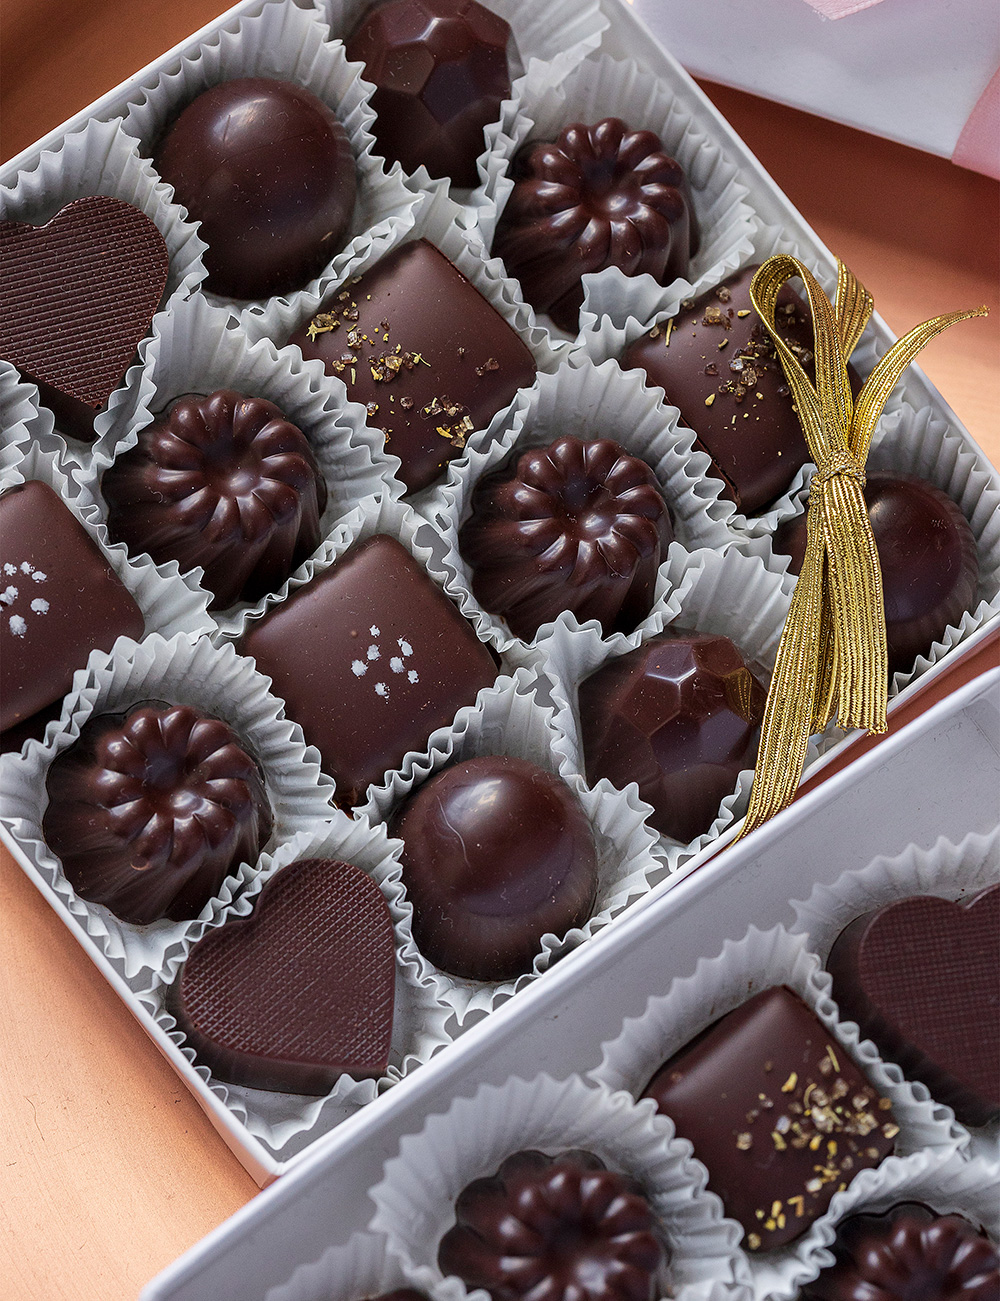 Videri Chocolate Factory: Gift boxes of mouthwatering chocolates are in high demand this season.